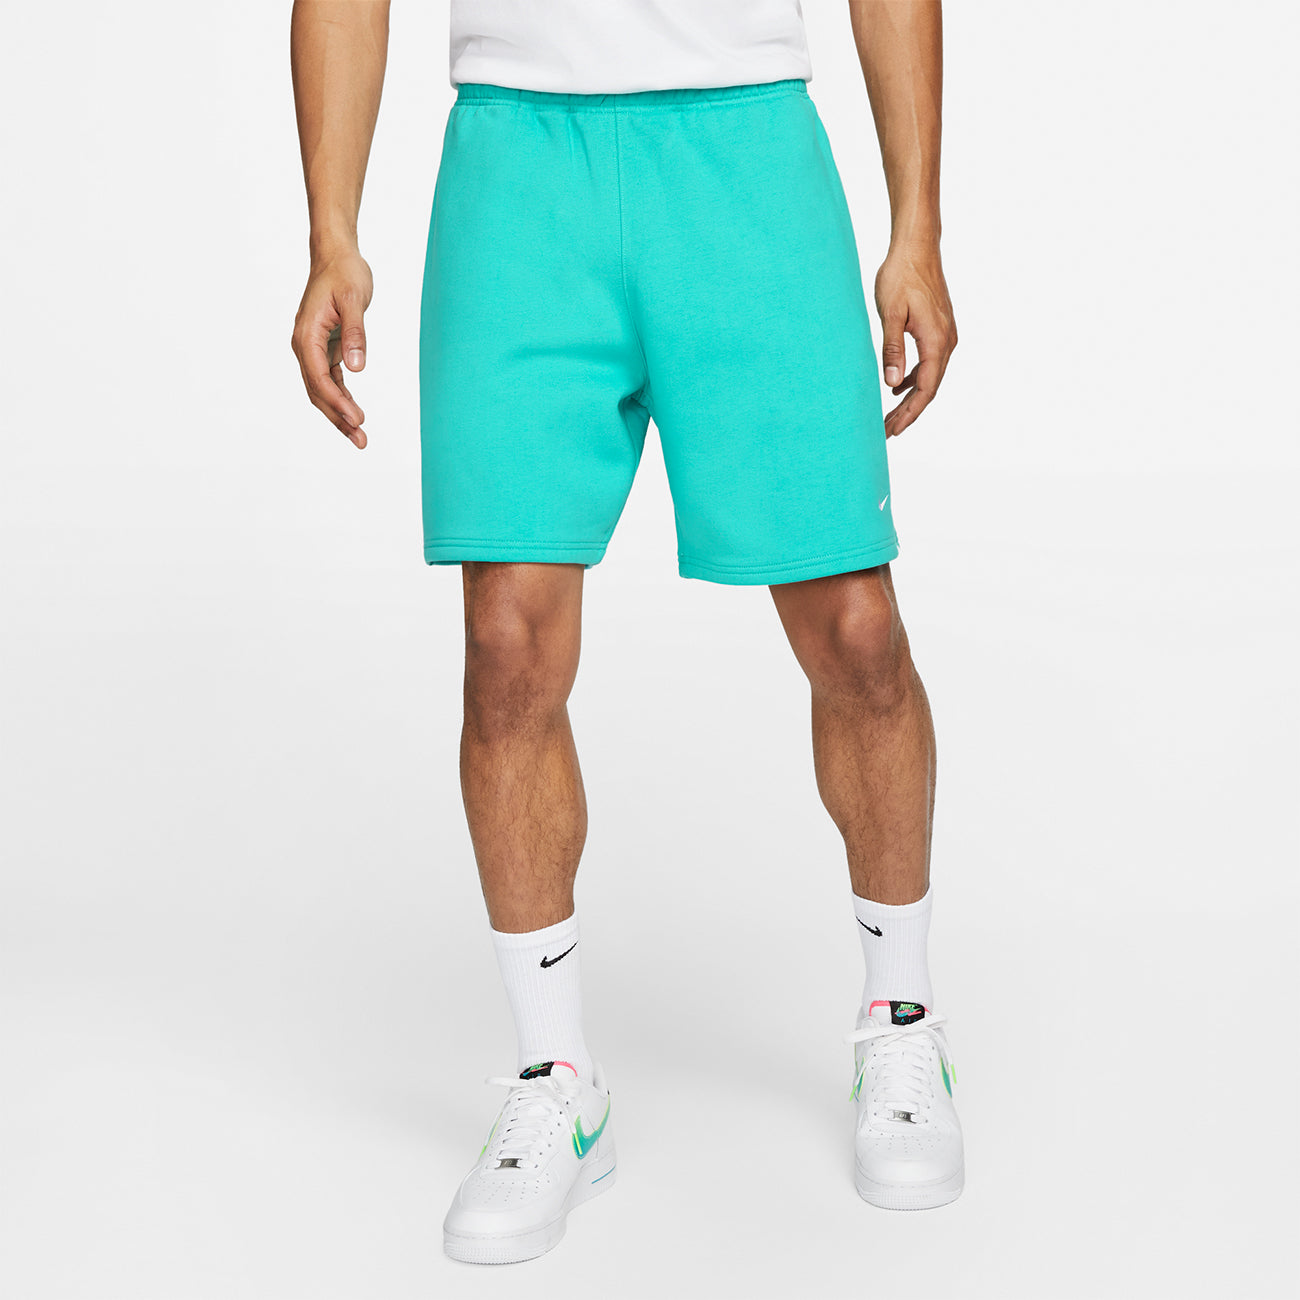 Soloswoosh Fleece Short Washed - Teal/White